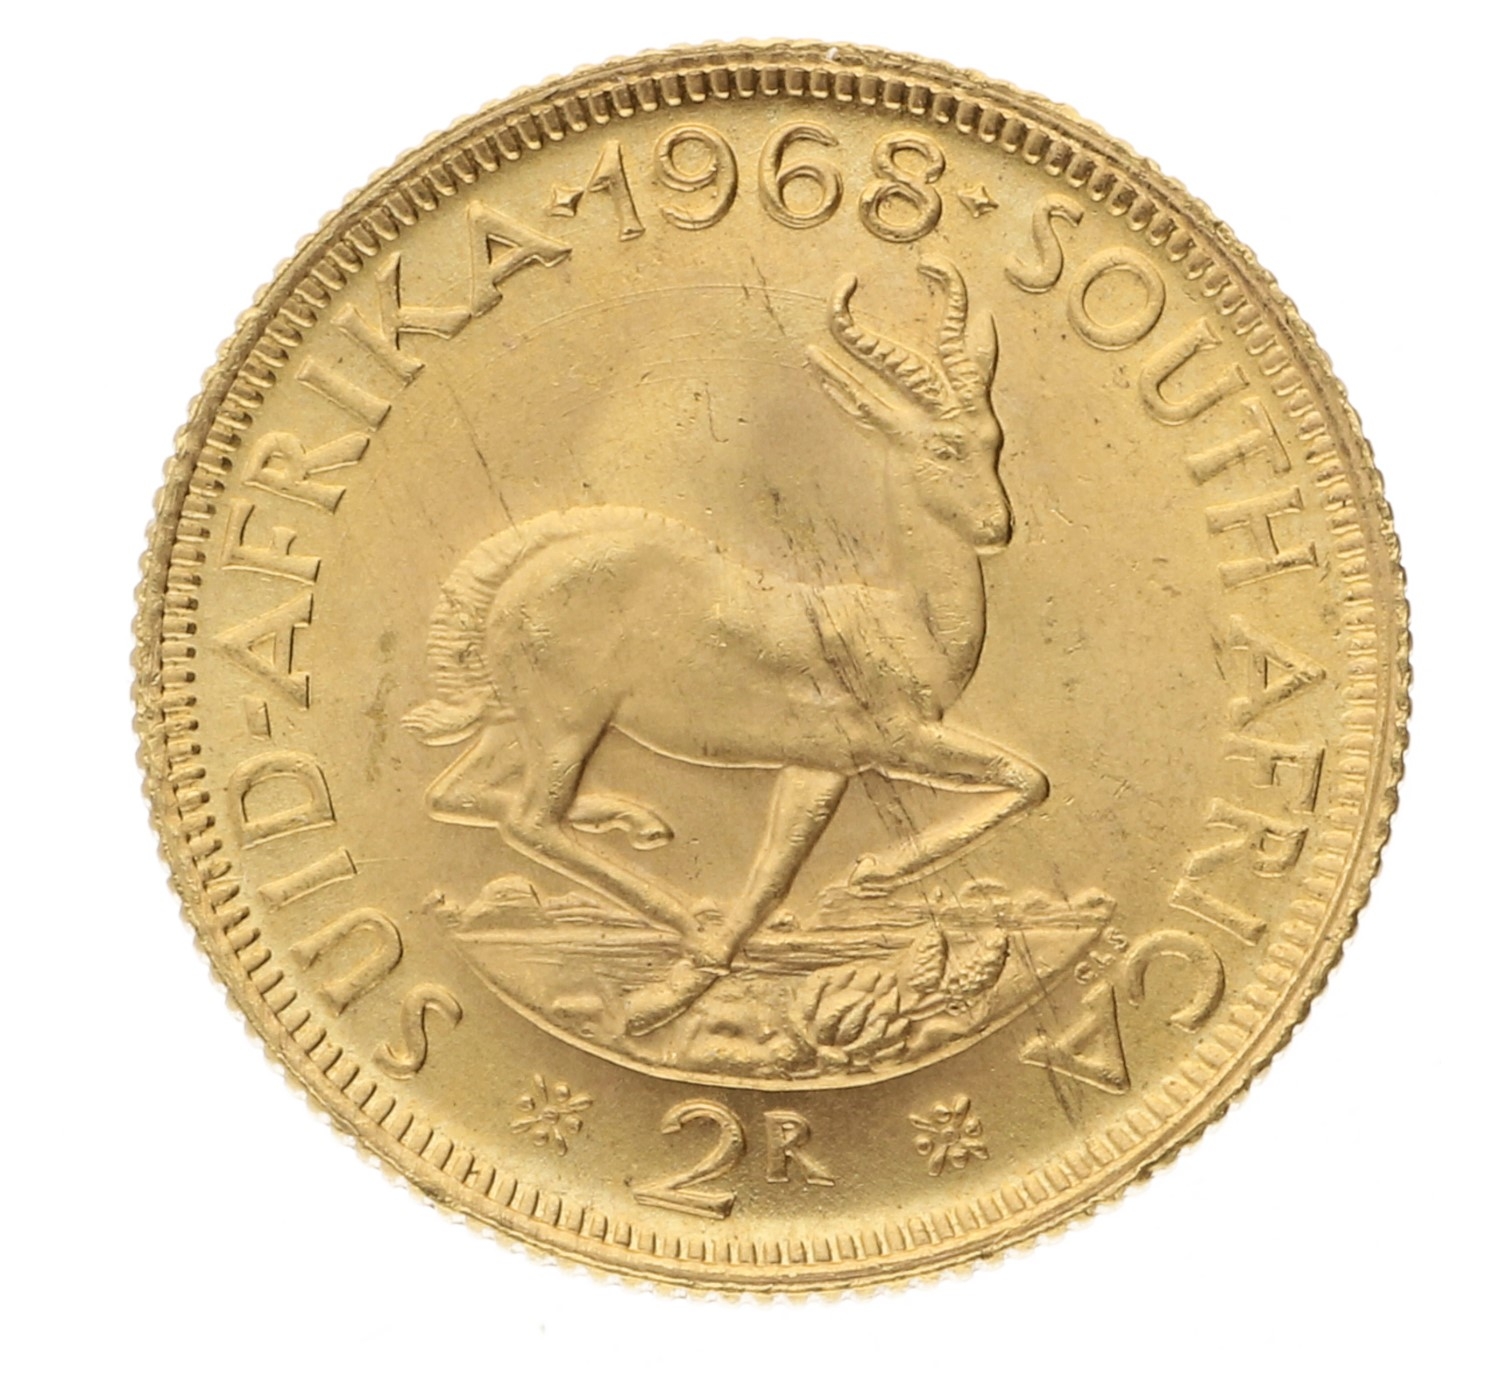 2 Rand - South Africa - 1968